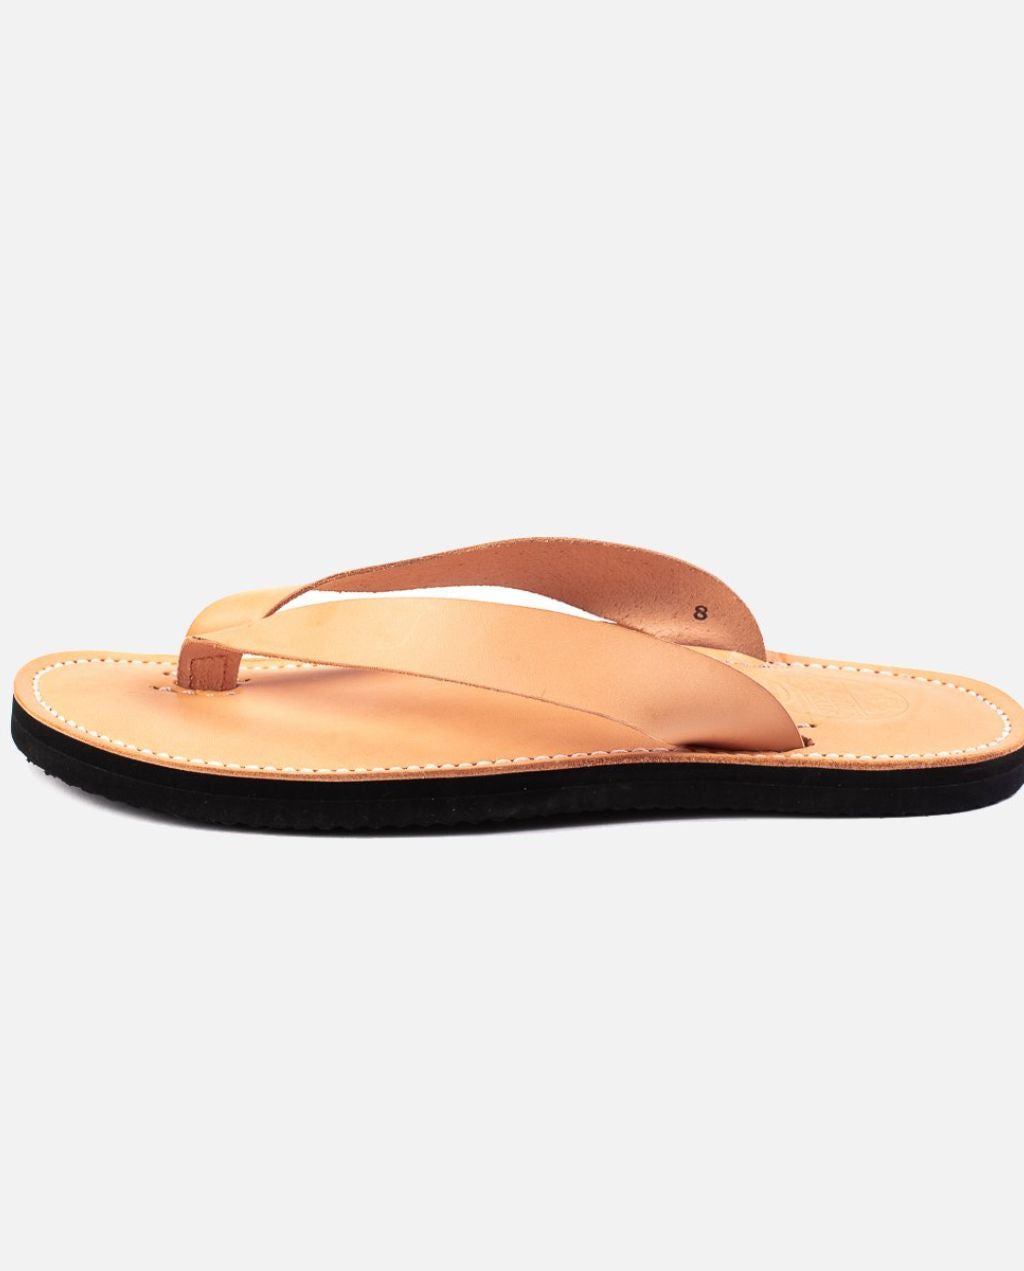 O.G.L OBBI GOOD LABEL X Dr. Sole Leather Thong Sandals - Natural